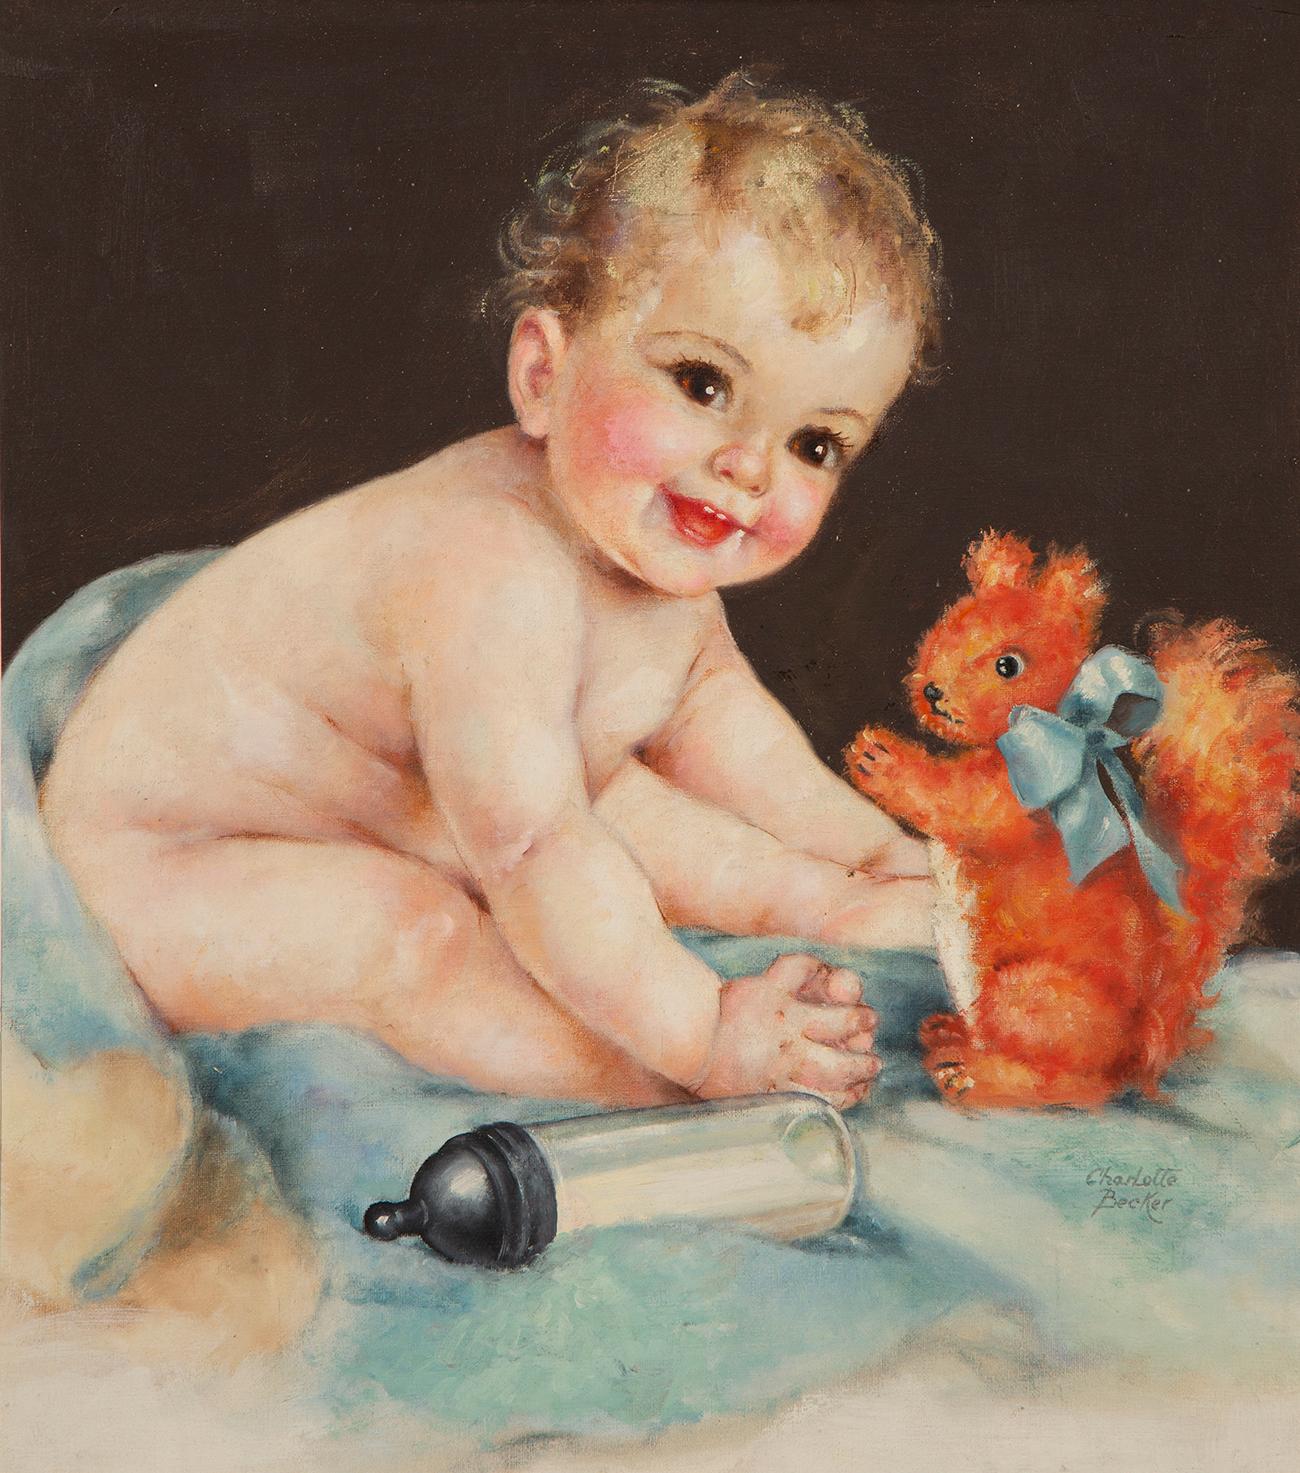 Child and Toy Squirrel - Painting by Charlotte Becker